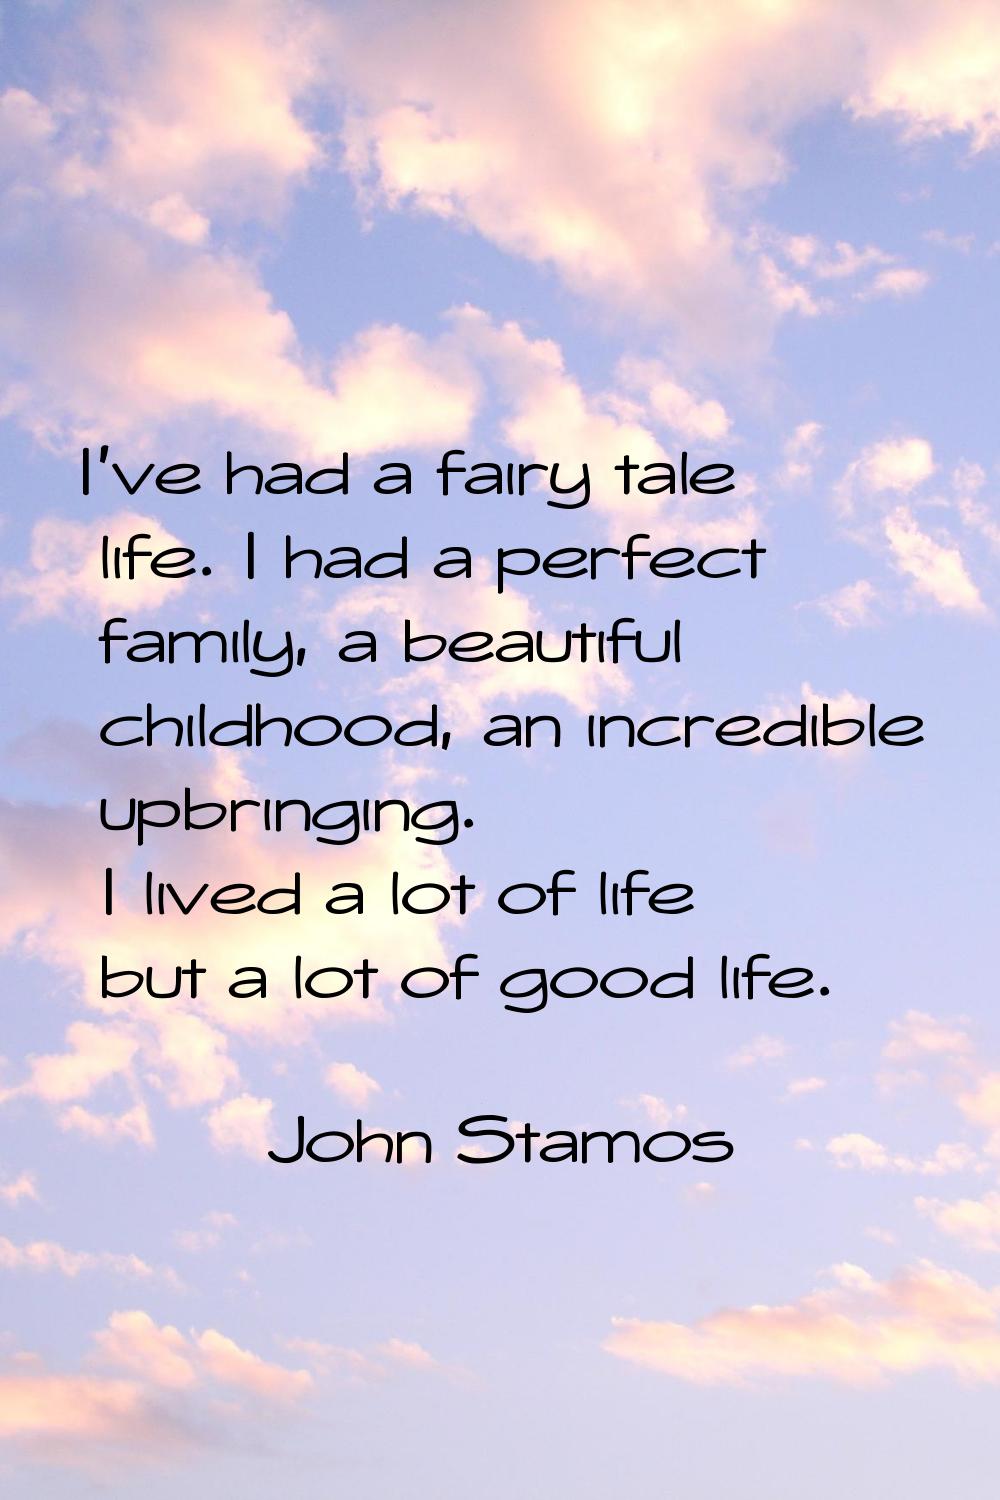 I've had a fairy tale life. I had a perfect family, a beautiful childhood, an incredible upbringing